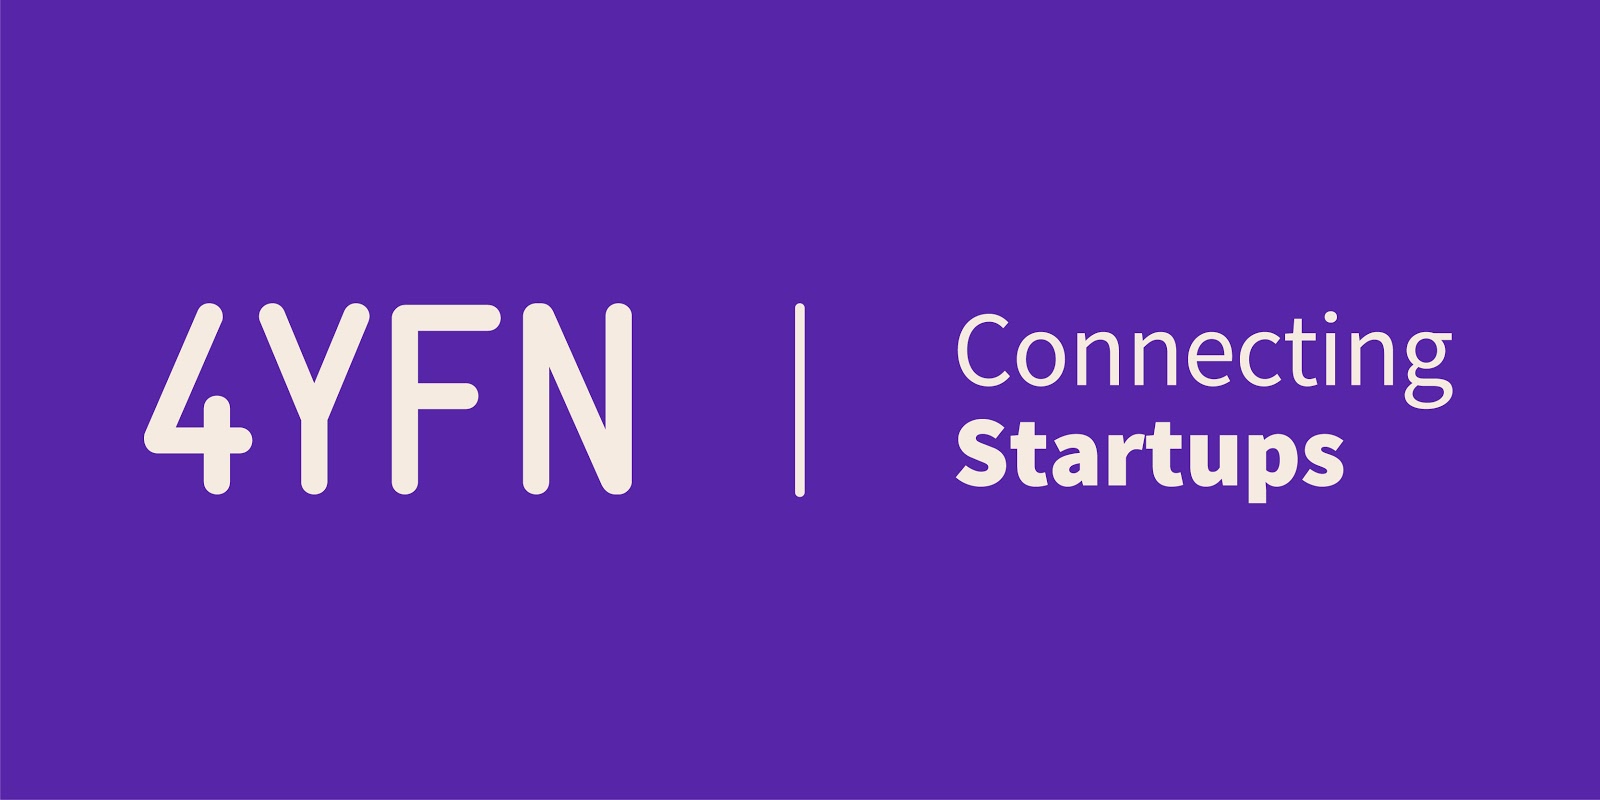 Docuten to attend 4YFN Barcelona as part of the Department for International Trade UK’s trade mission